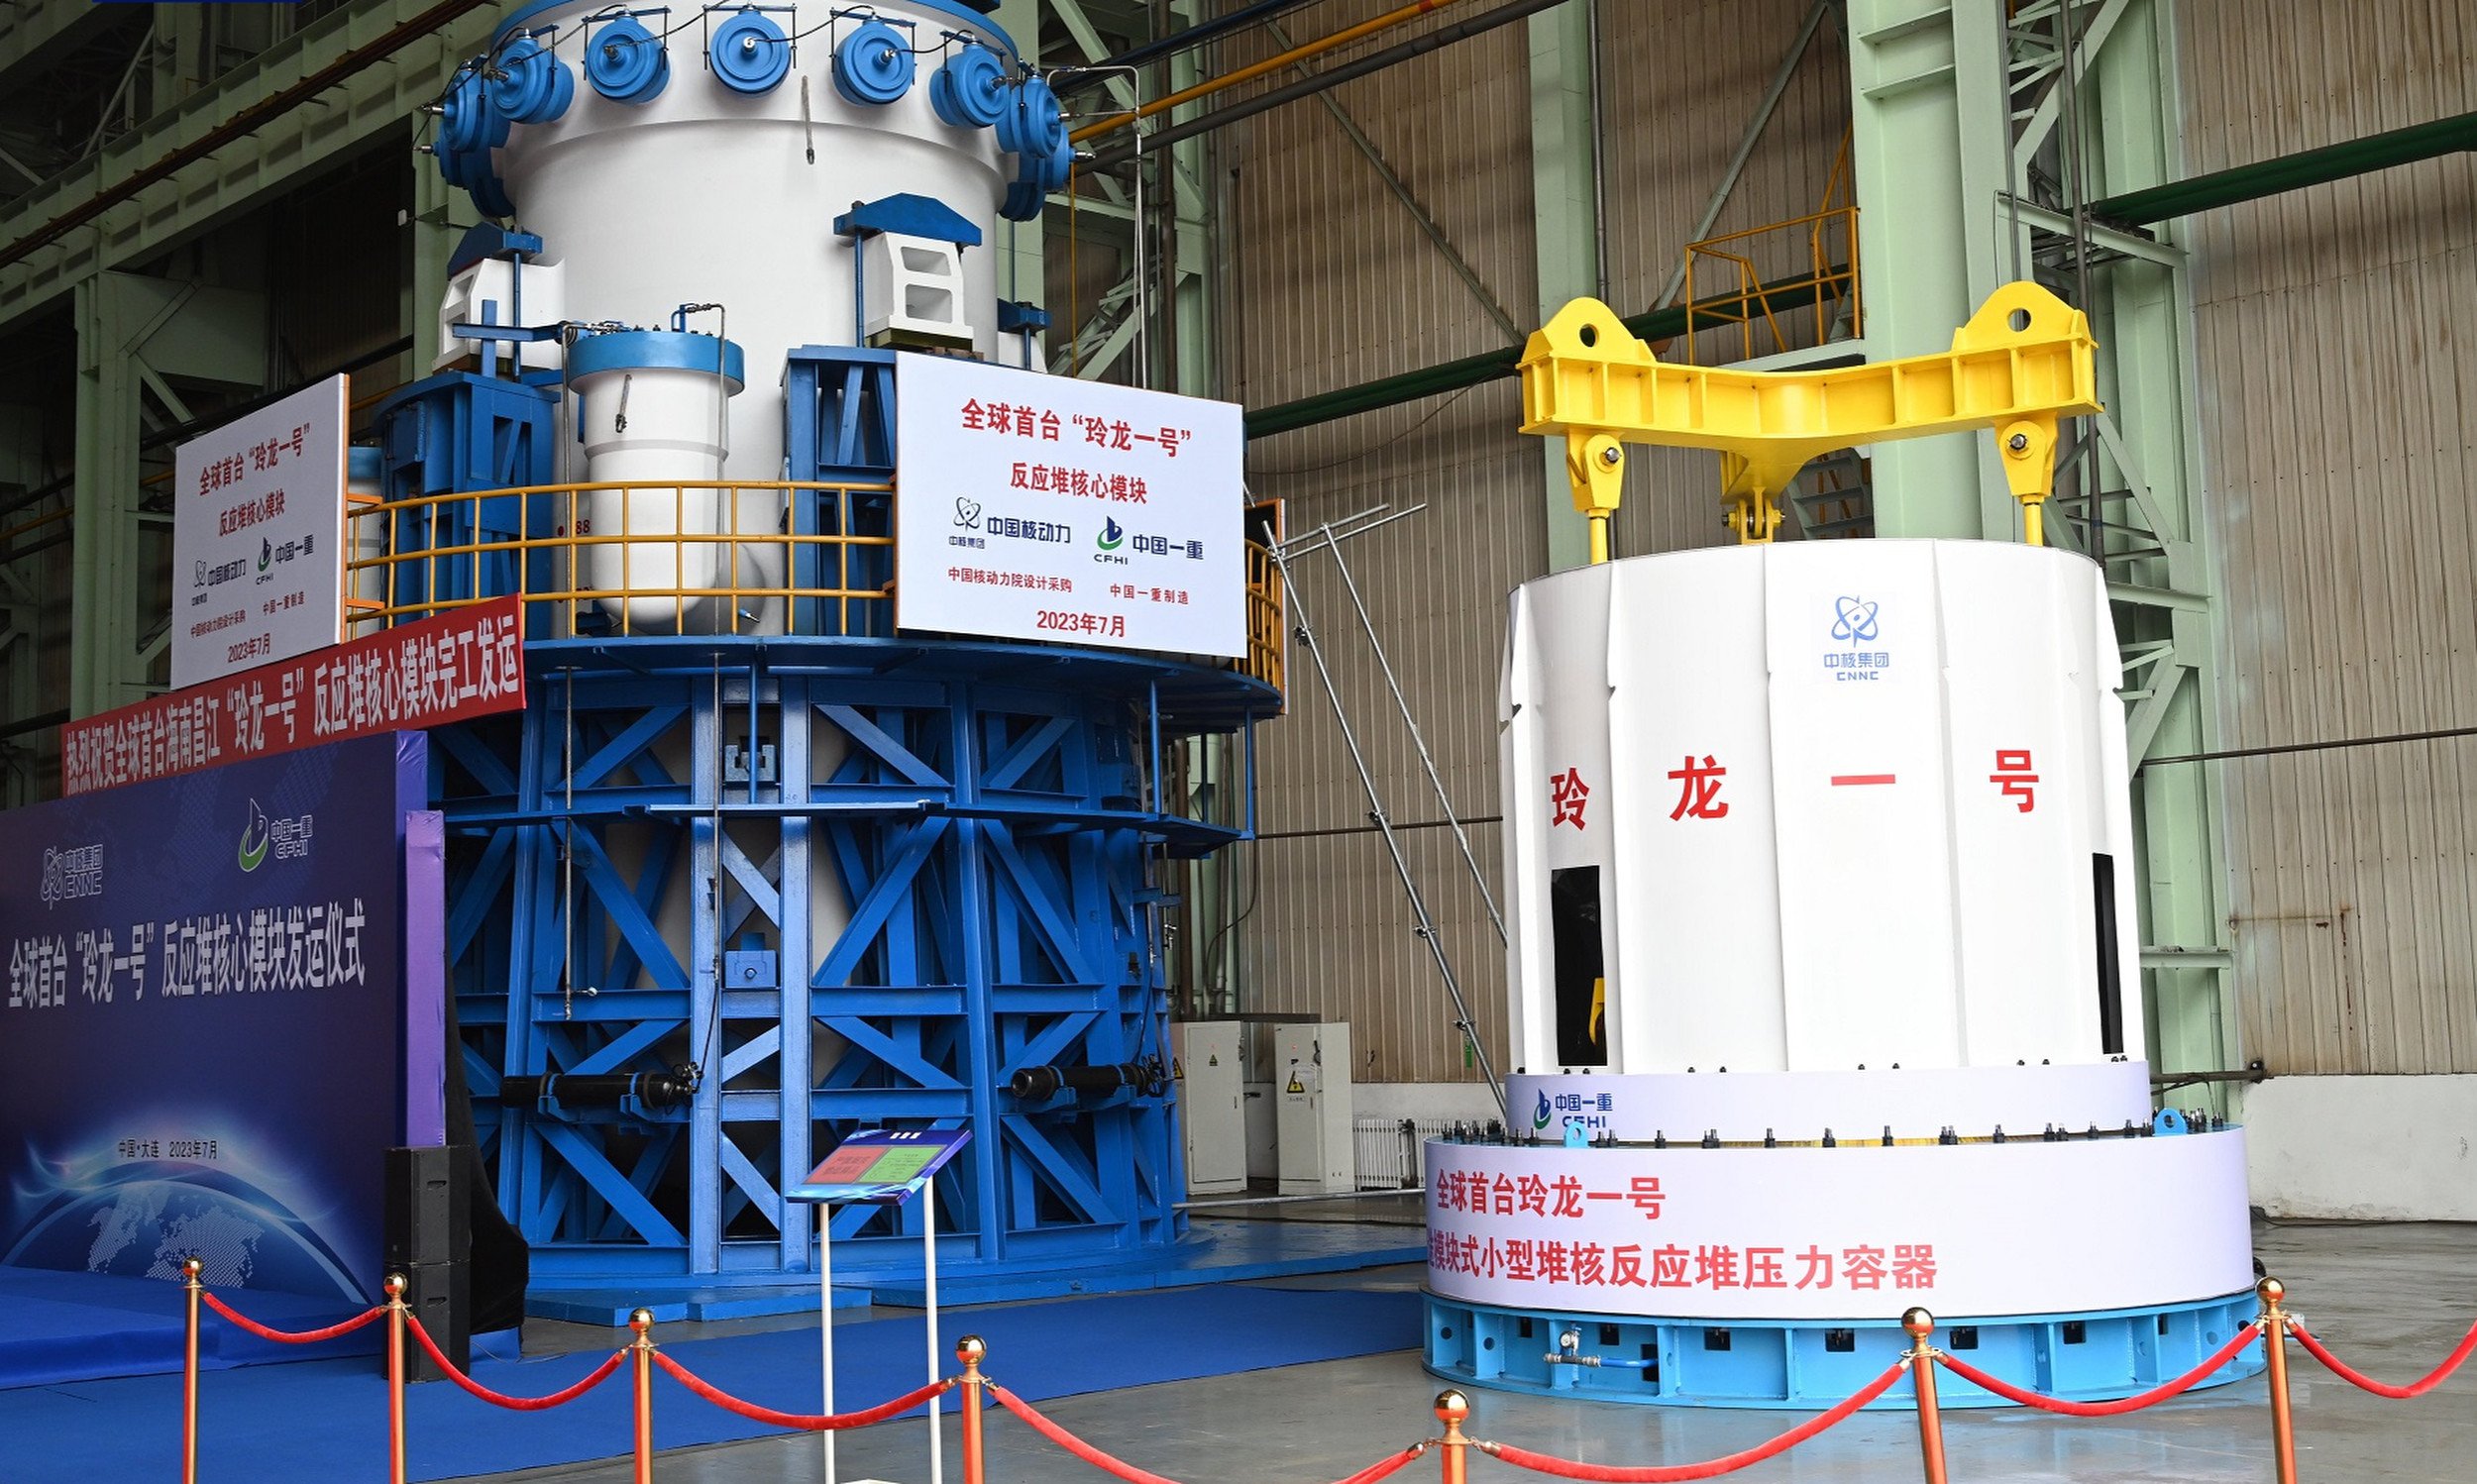 Work on the reactor’s core module has been completed. Photo: CCTV